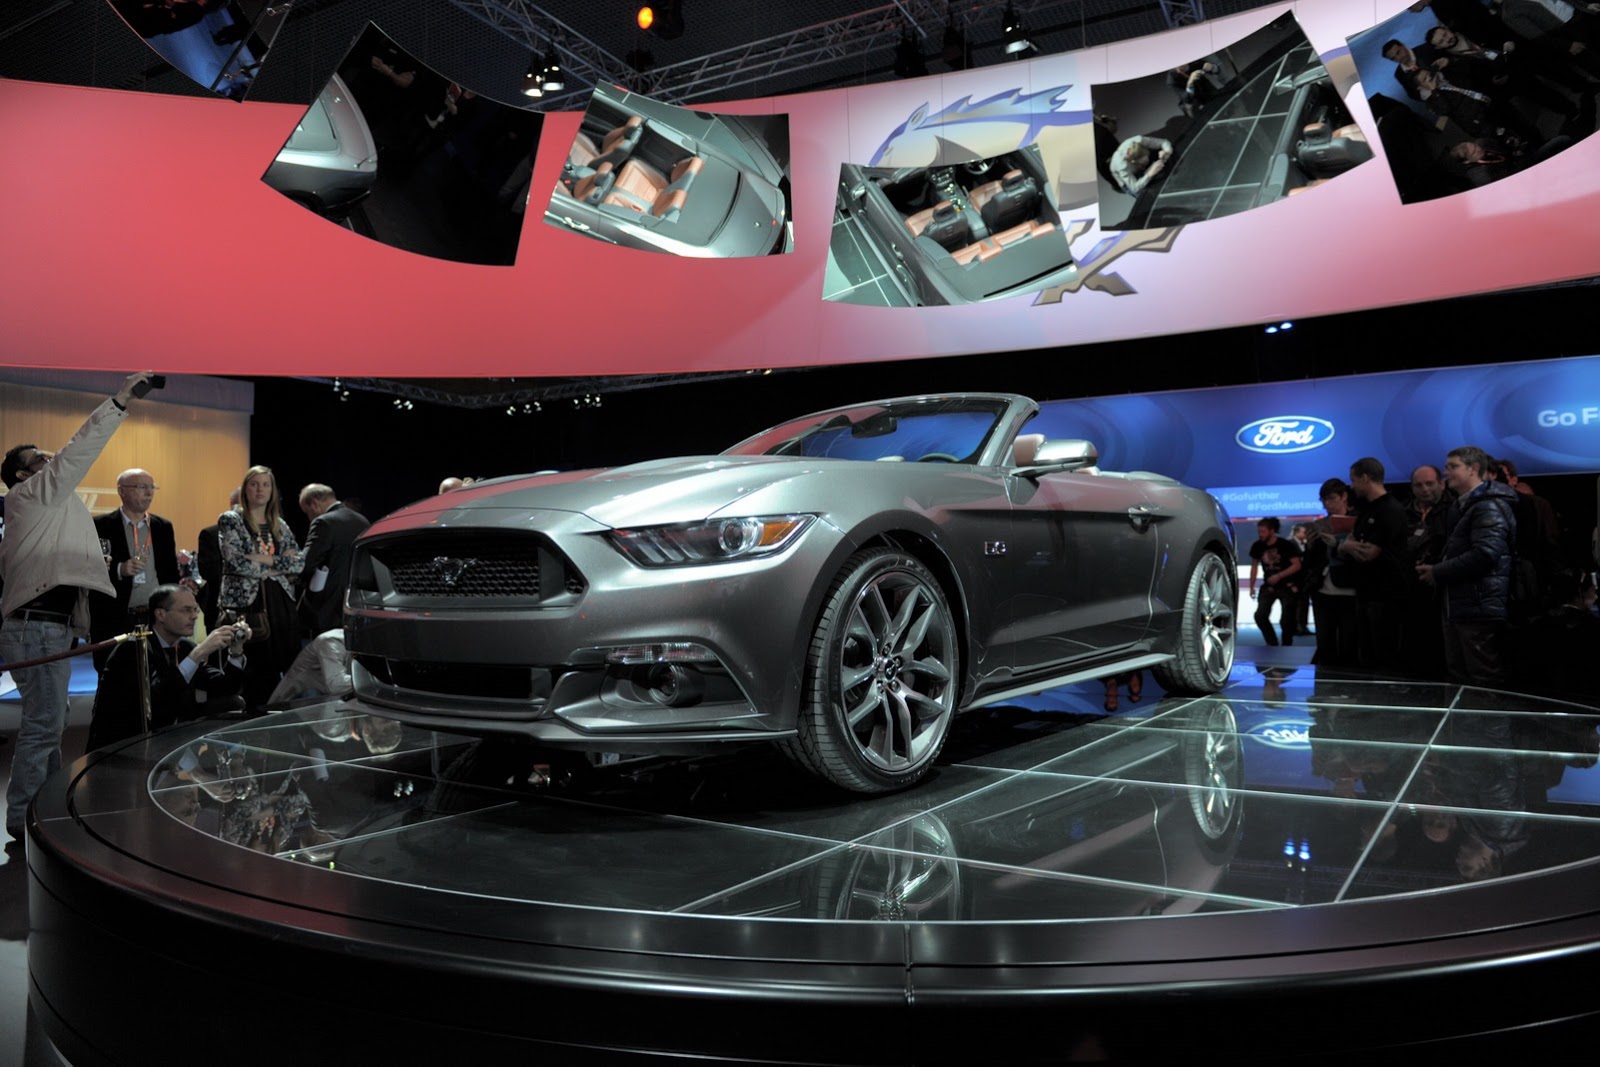 2015-ford-mustang-convertible-02